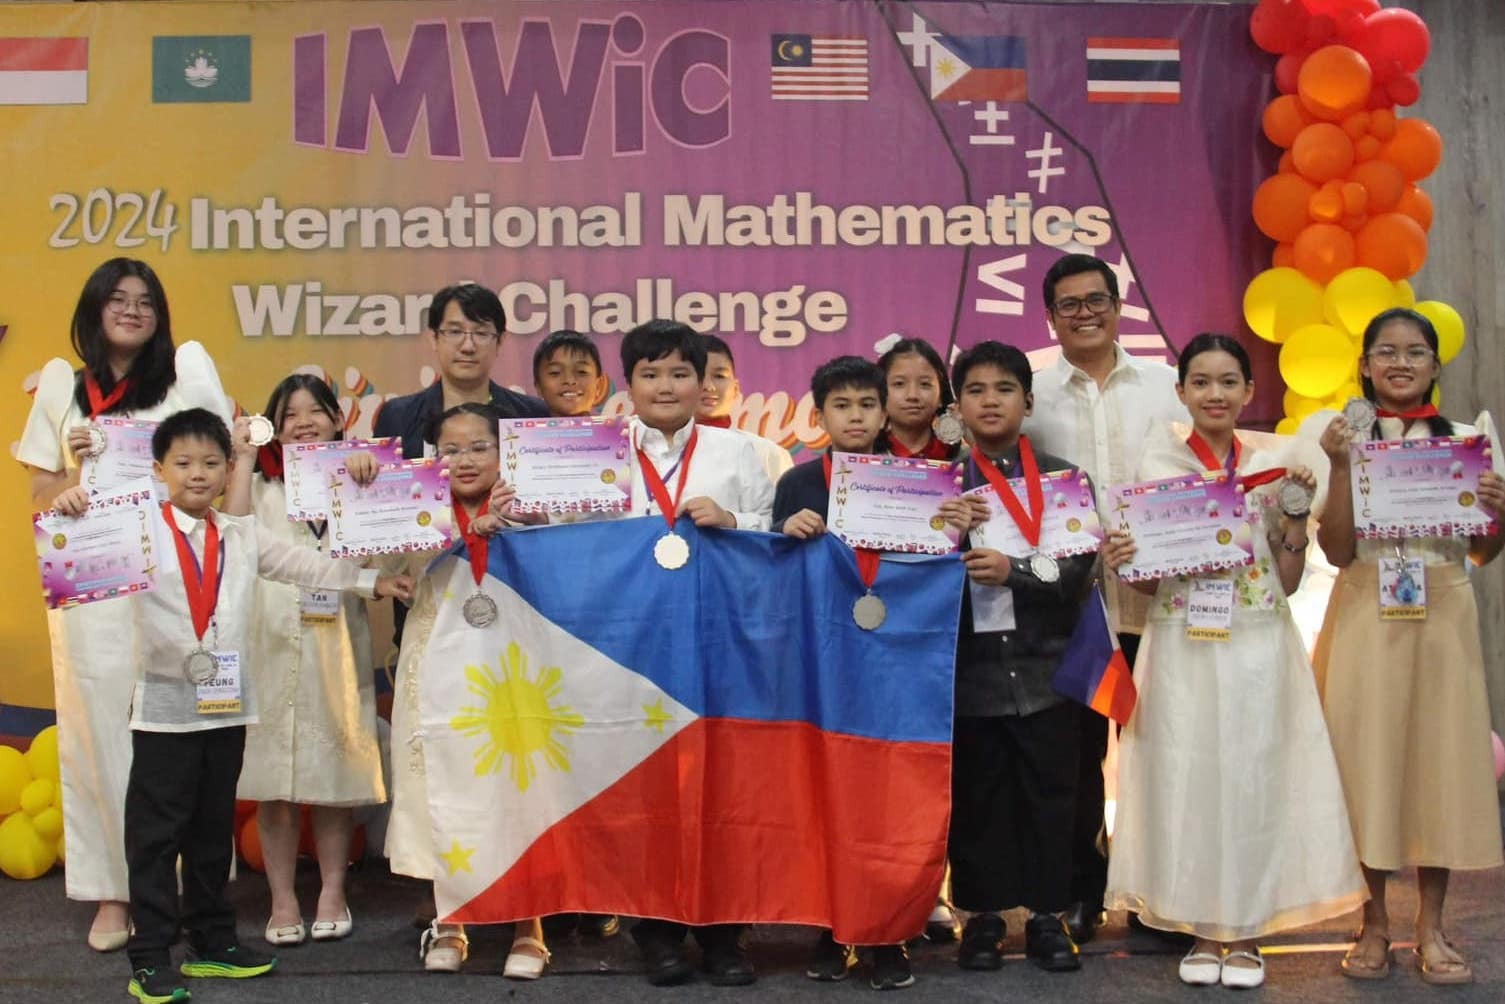 Pinoy mathletes bring home 37 medals from Int’l Math Wizards Challenge